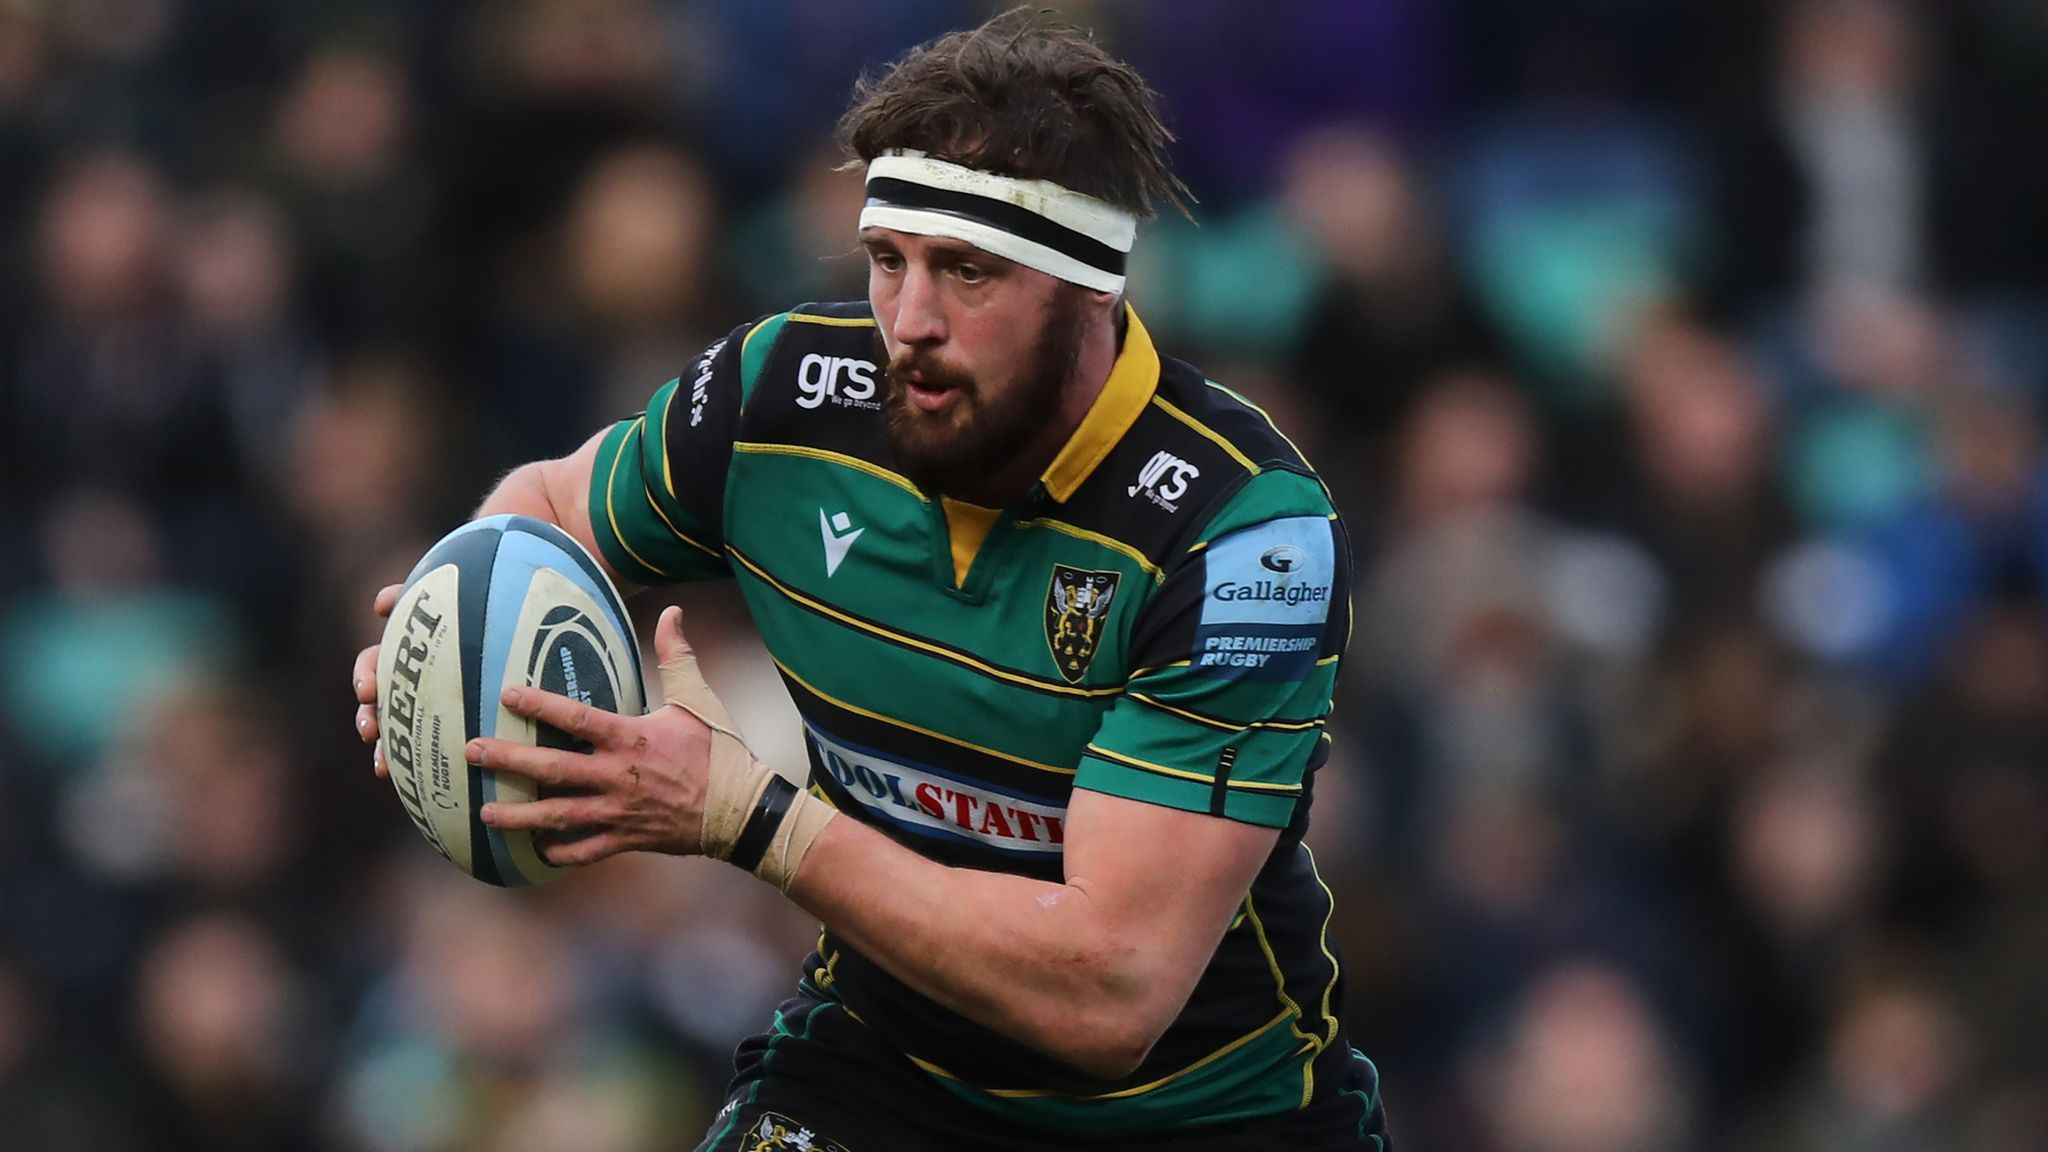 Northampton Saints and England flanker Tom Wood recovering from lung infection Rugby Union News Sky Sports